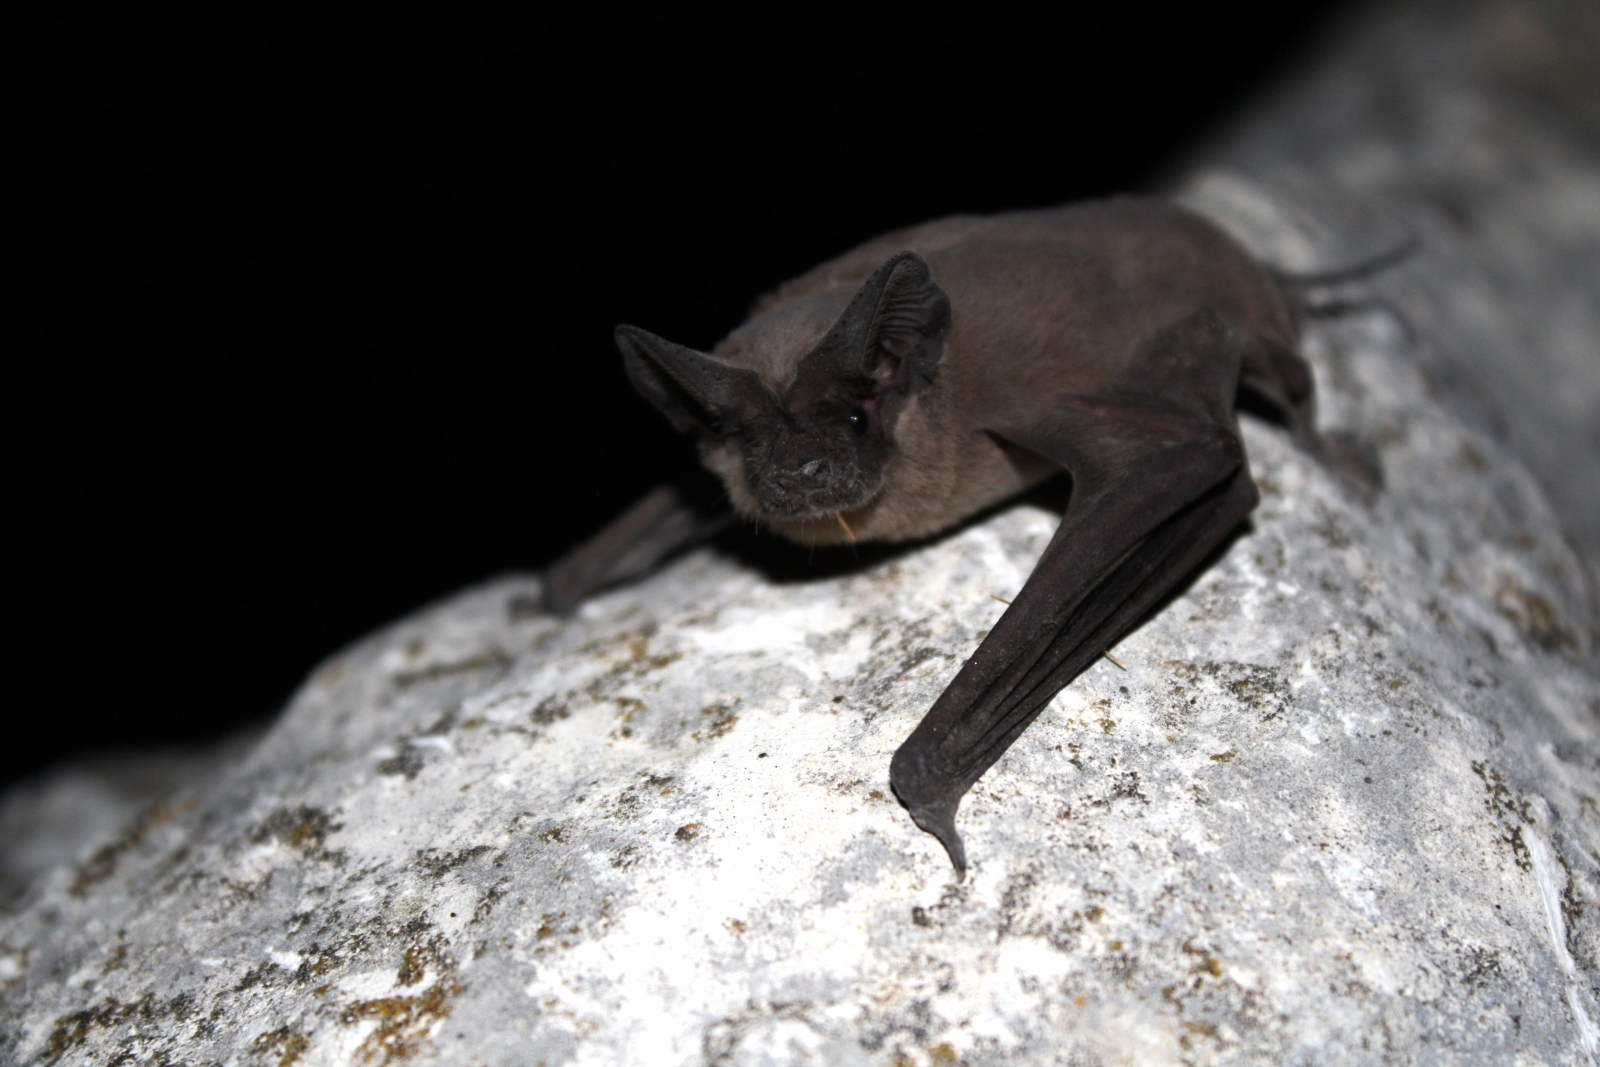 Ebola: Children playing near free-tailed bat nest caused worst outbreak in history